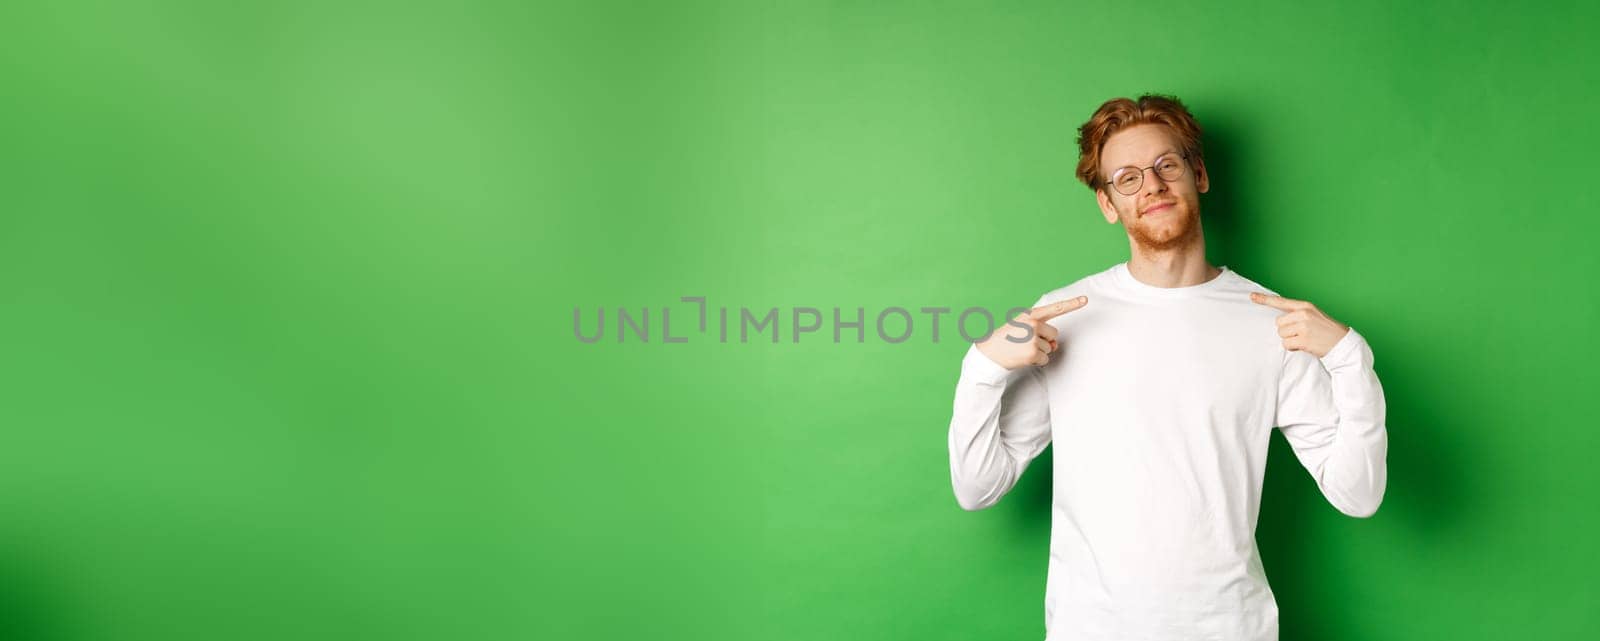 Confident and smug redhead man in glasses smiling, pointing at himself self-assured, standing over green background. Copy space